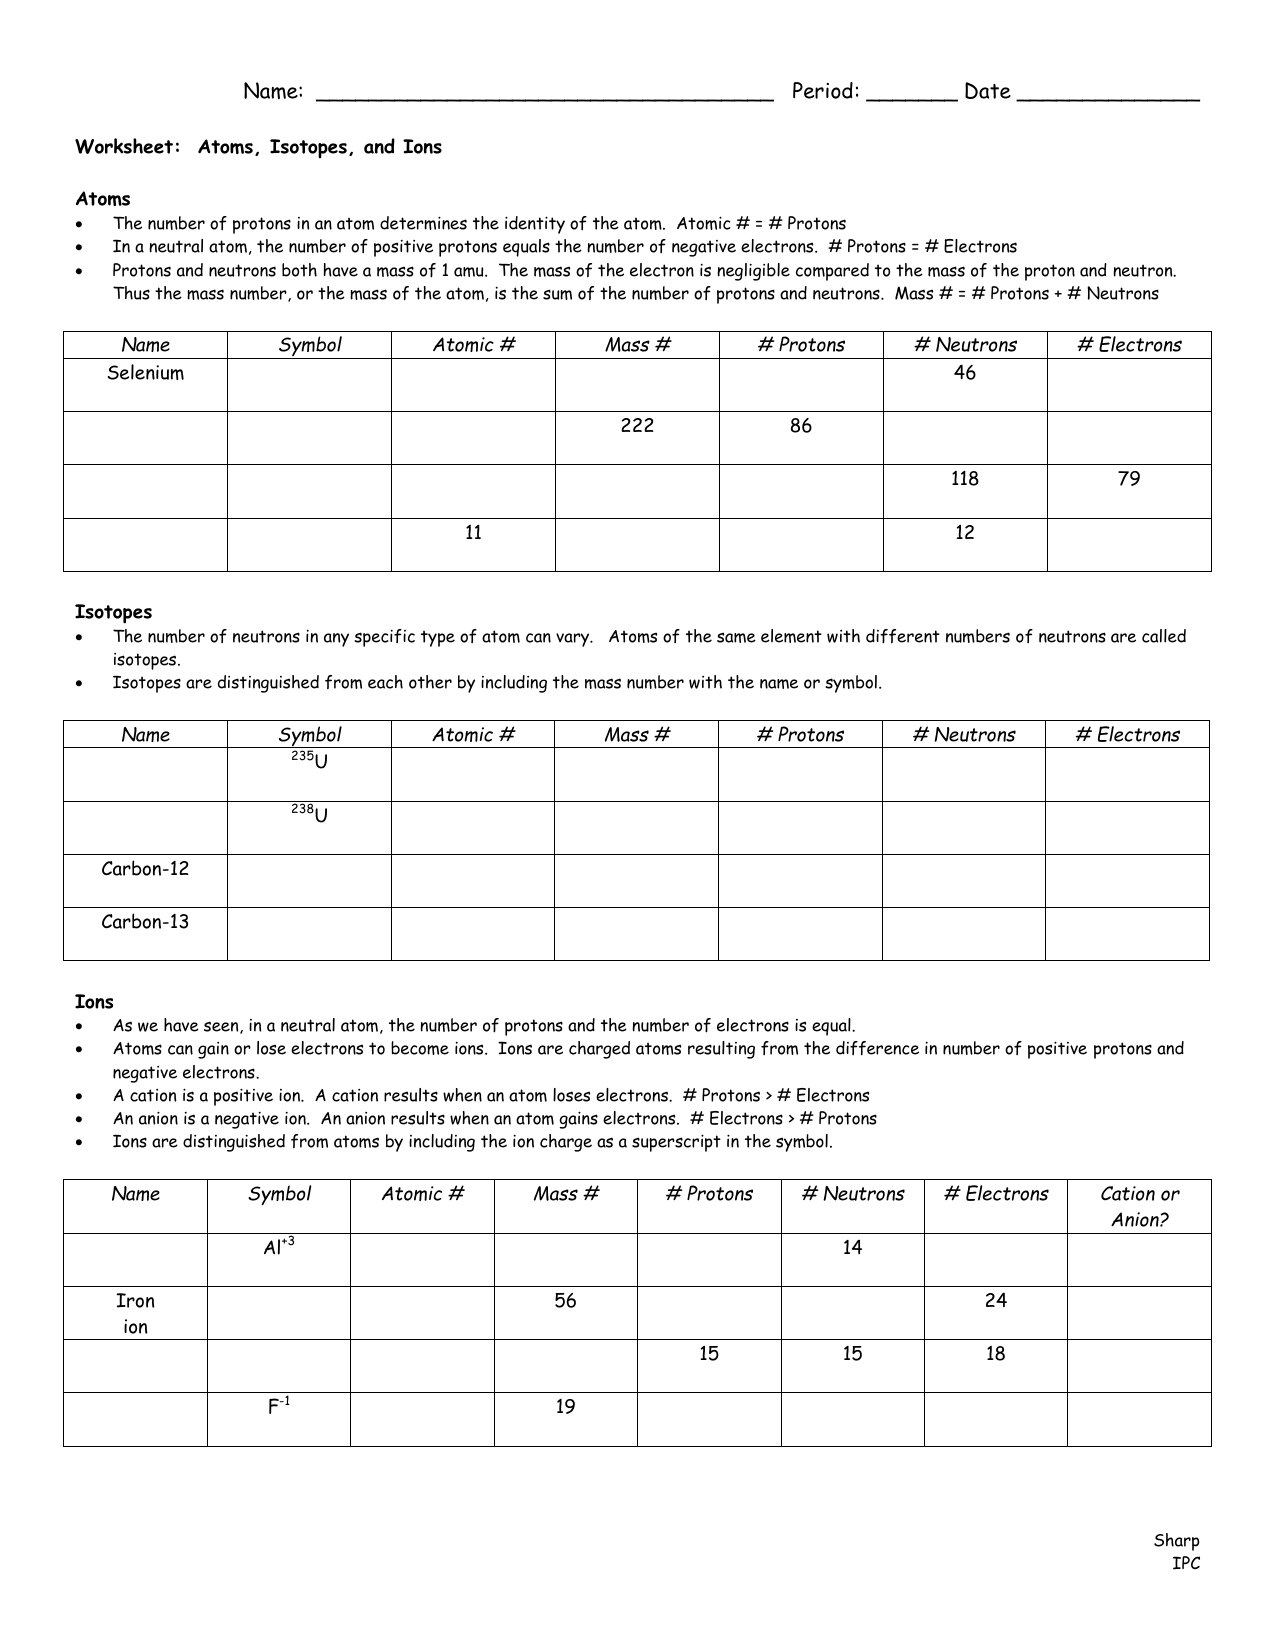 Atoms, Isotopes, & Ions Worksheet Regarding Ions And Isotopes Worksheet